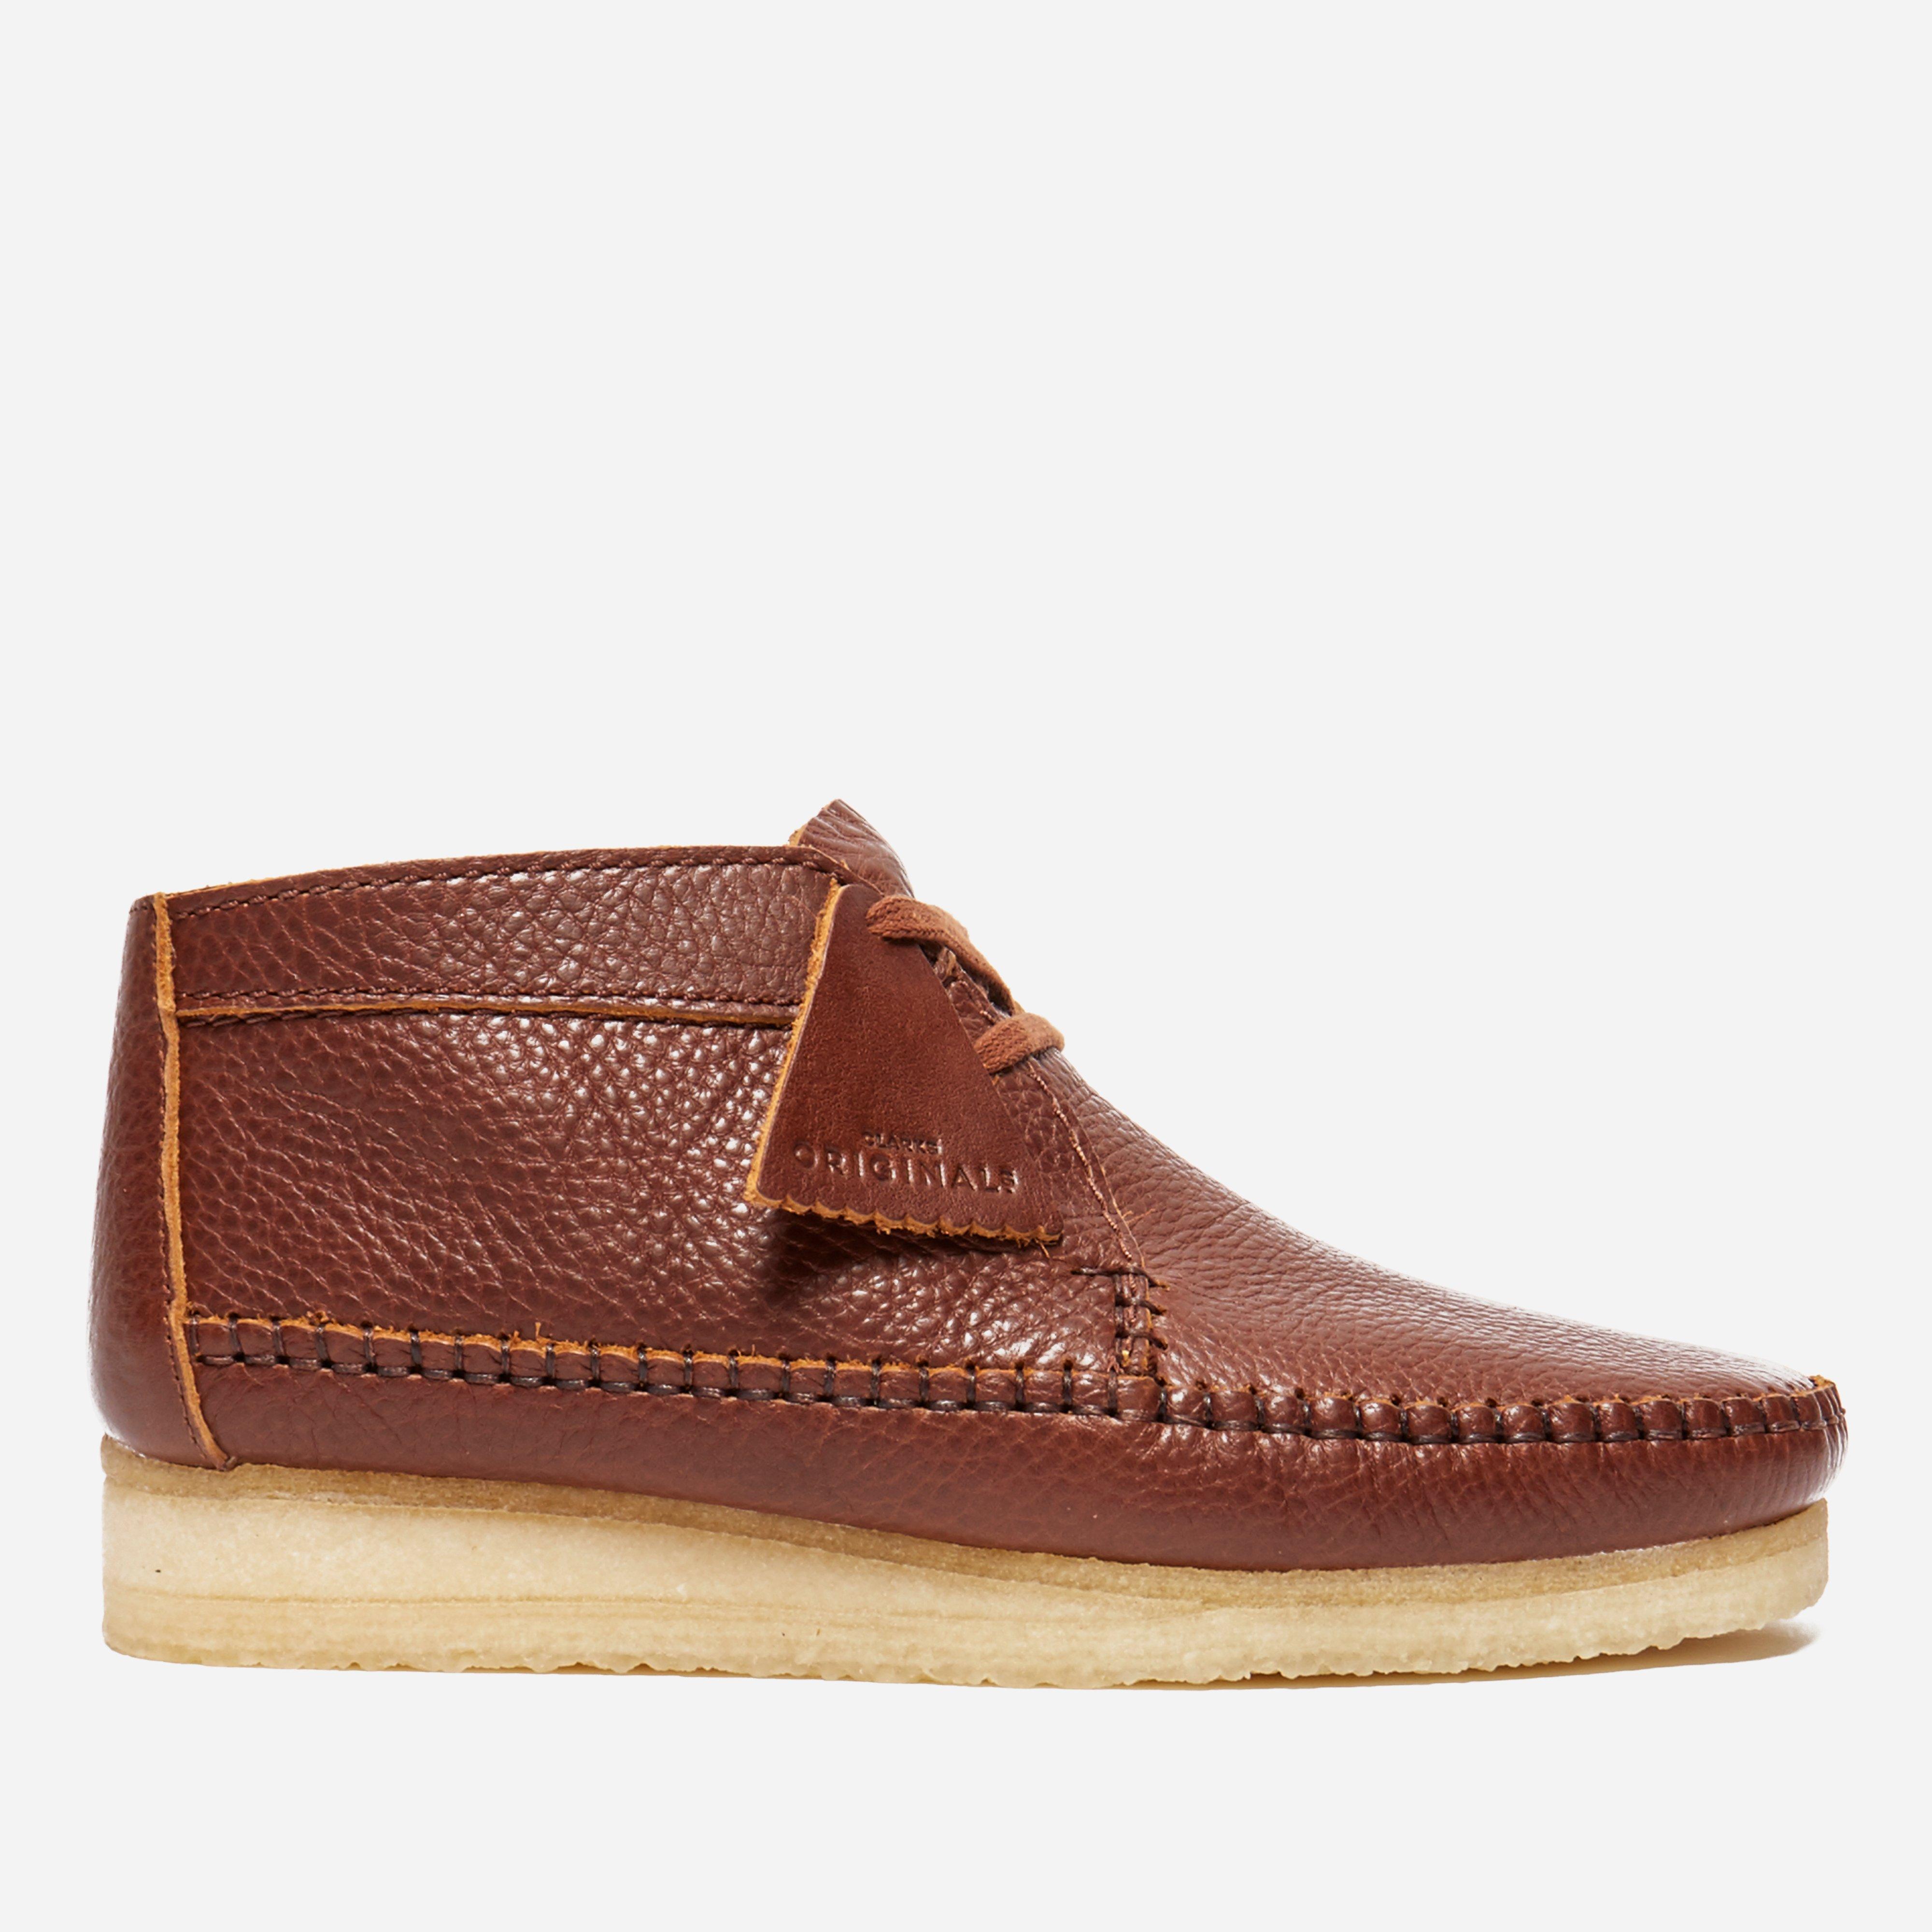 Clarks Weaver Brown Leather Italy, SAVE 37% - editorialsinderesis.com